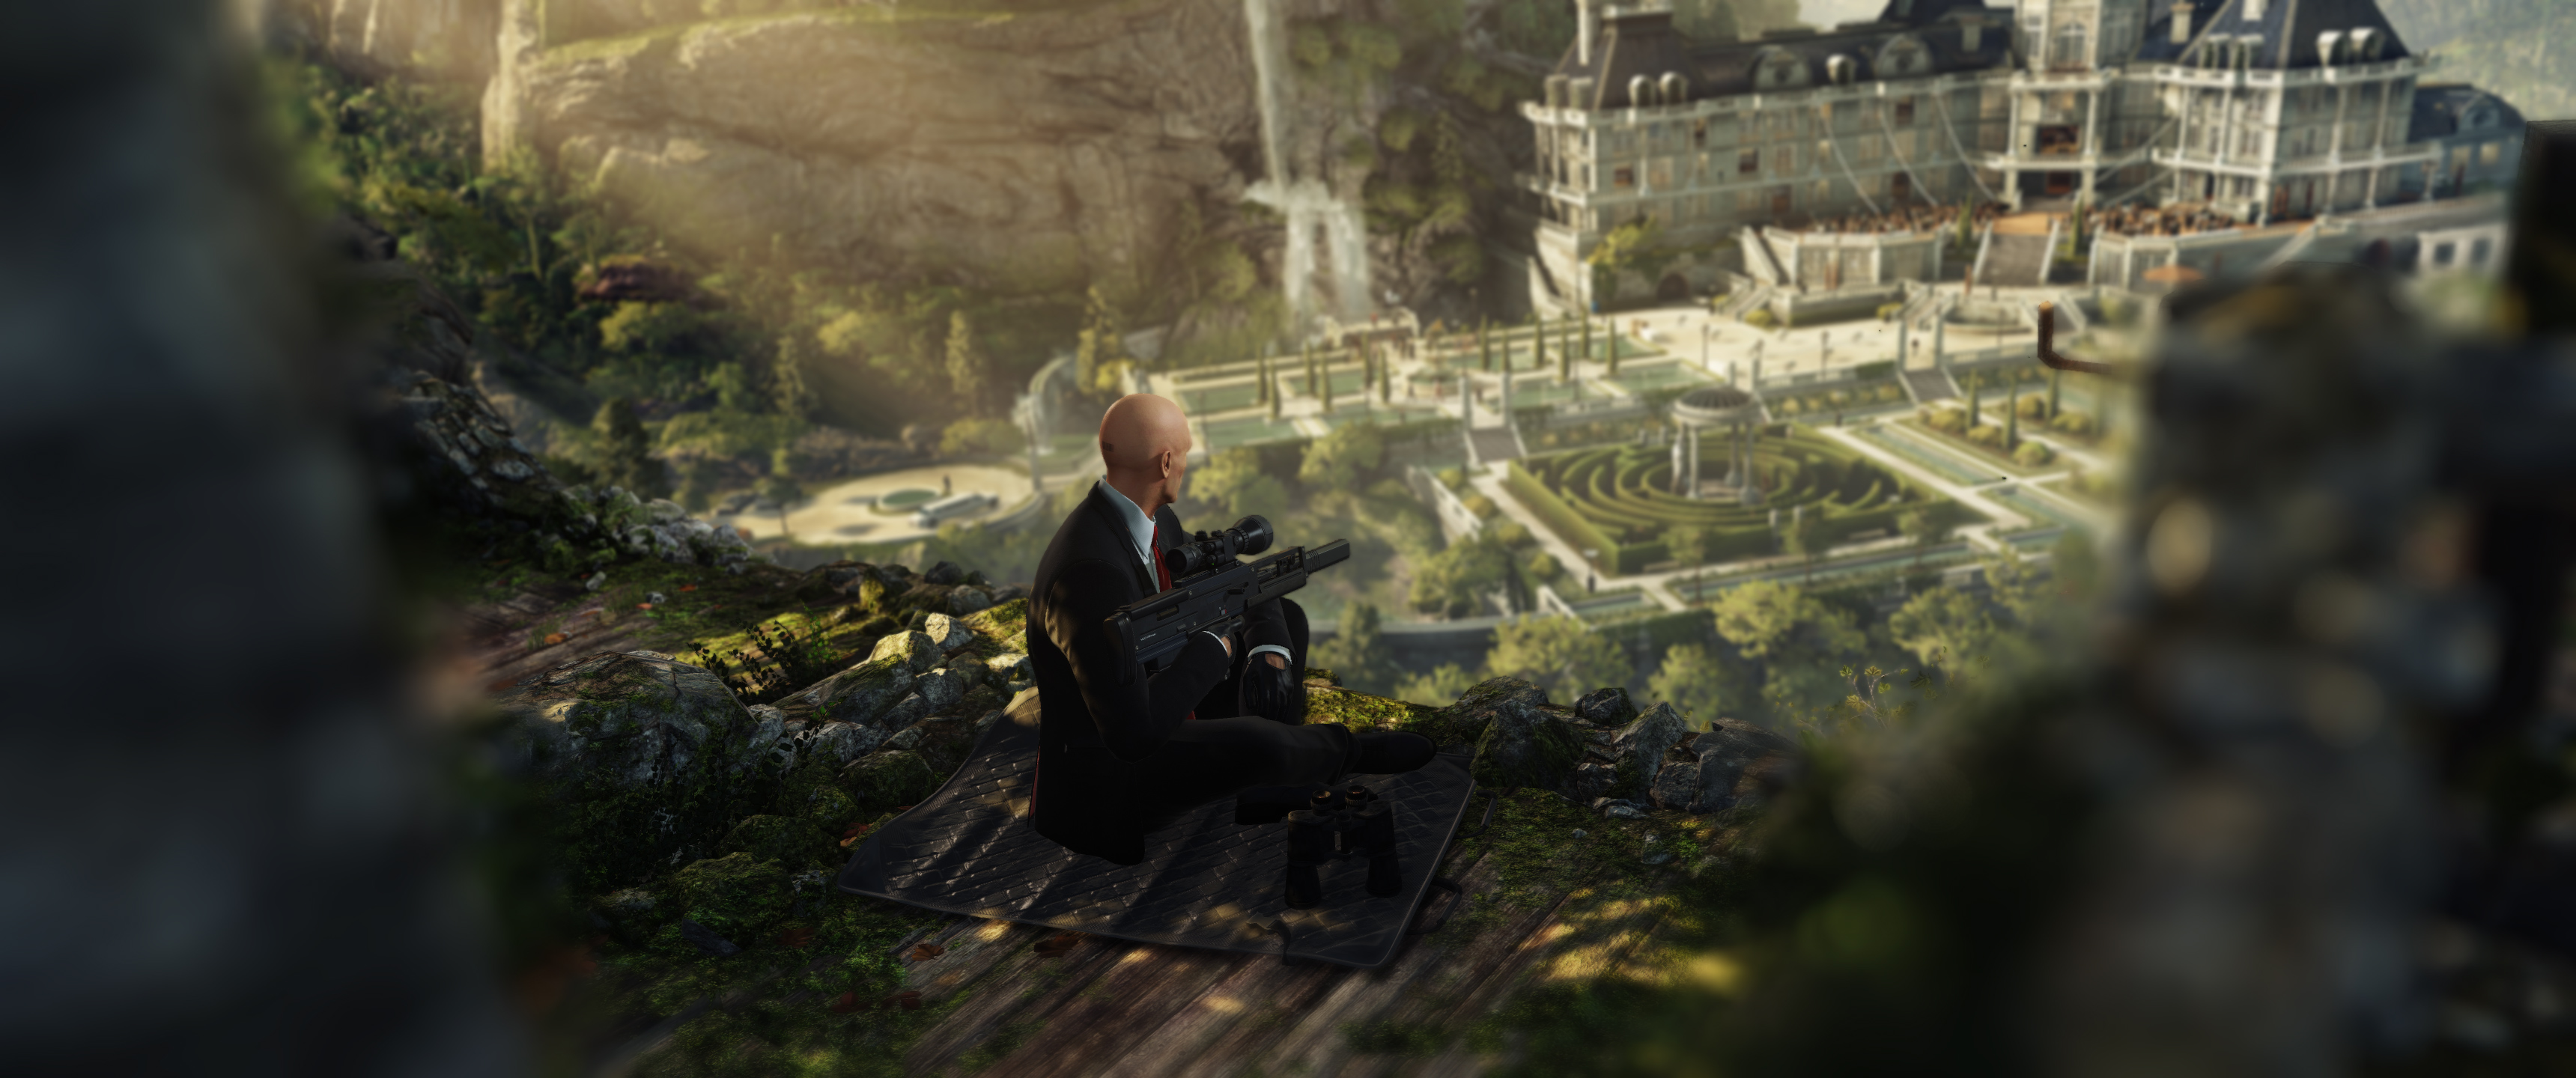 android hitman 2 images